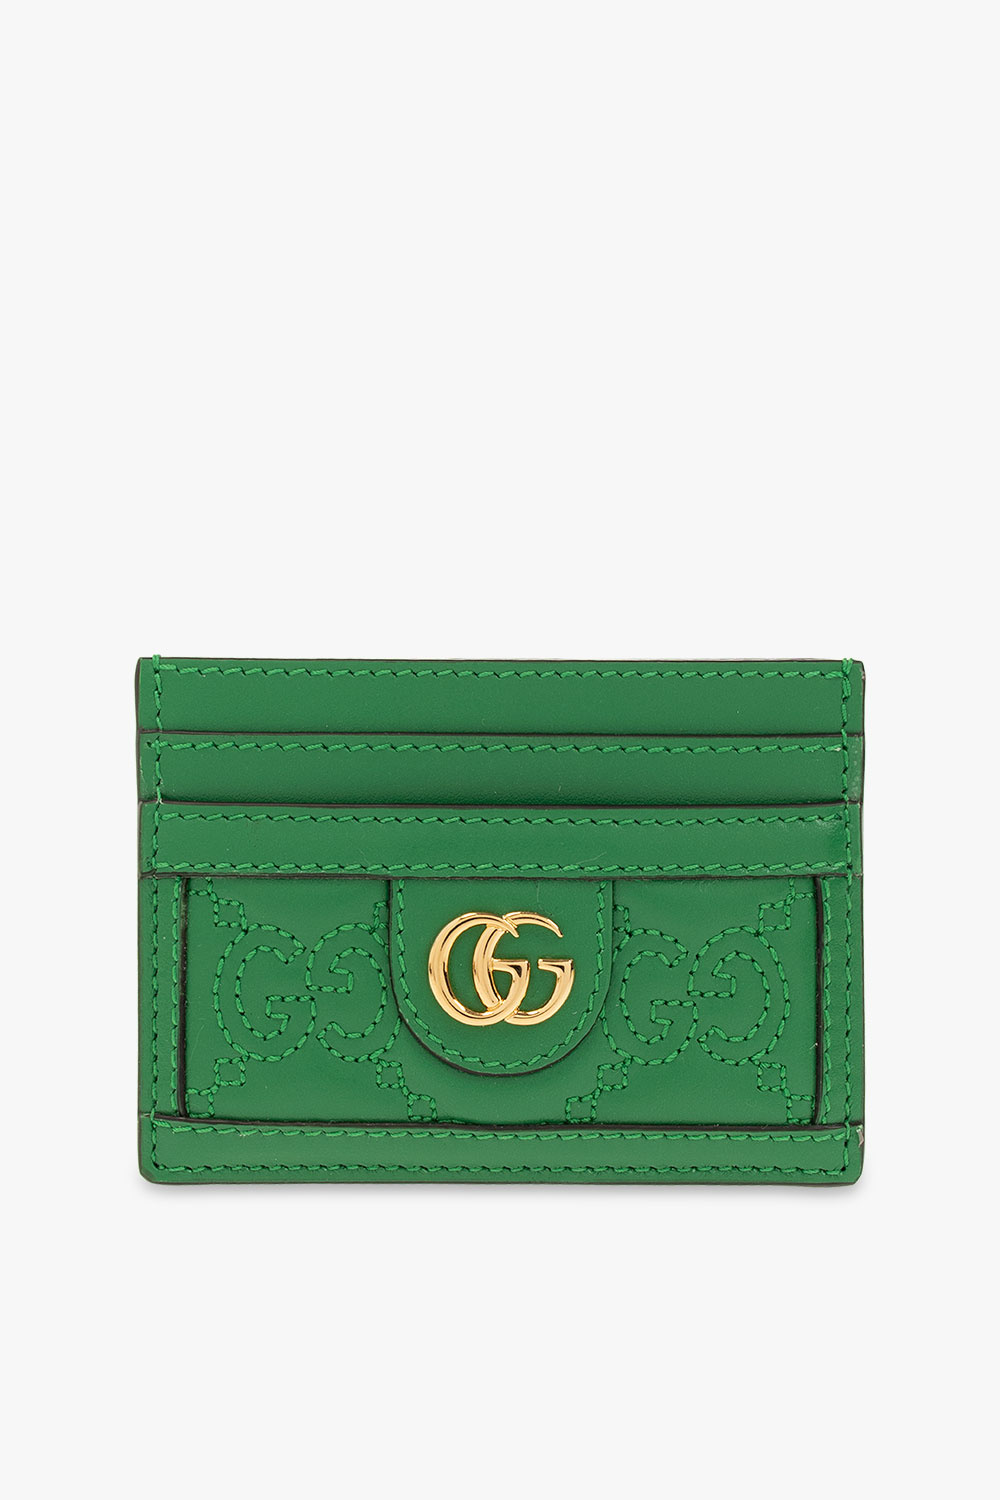 Gucci Leather card case